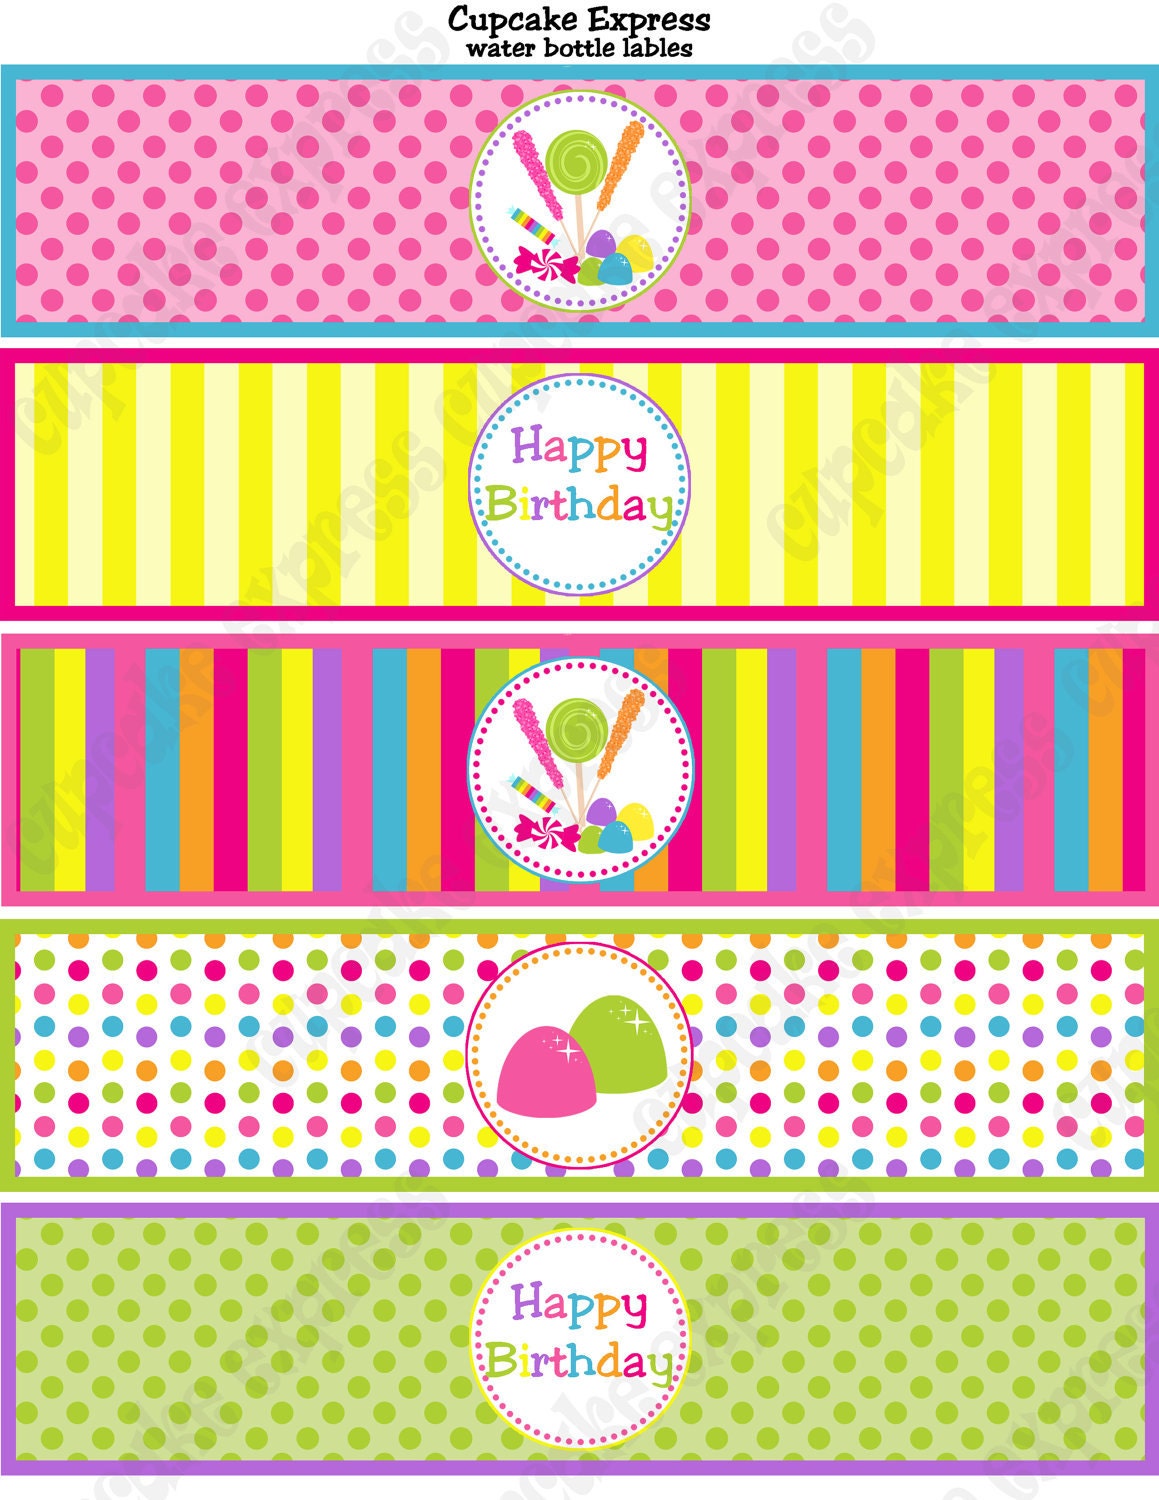 Candy Shoppe Birthday Party Ideas